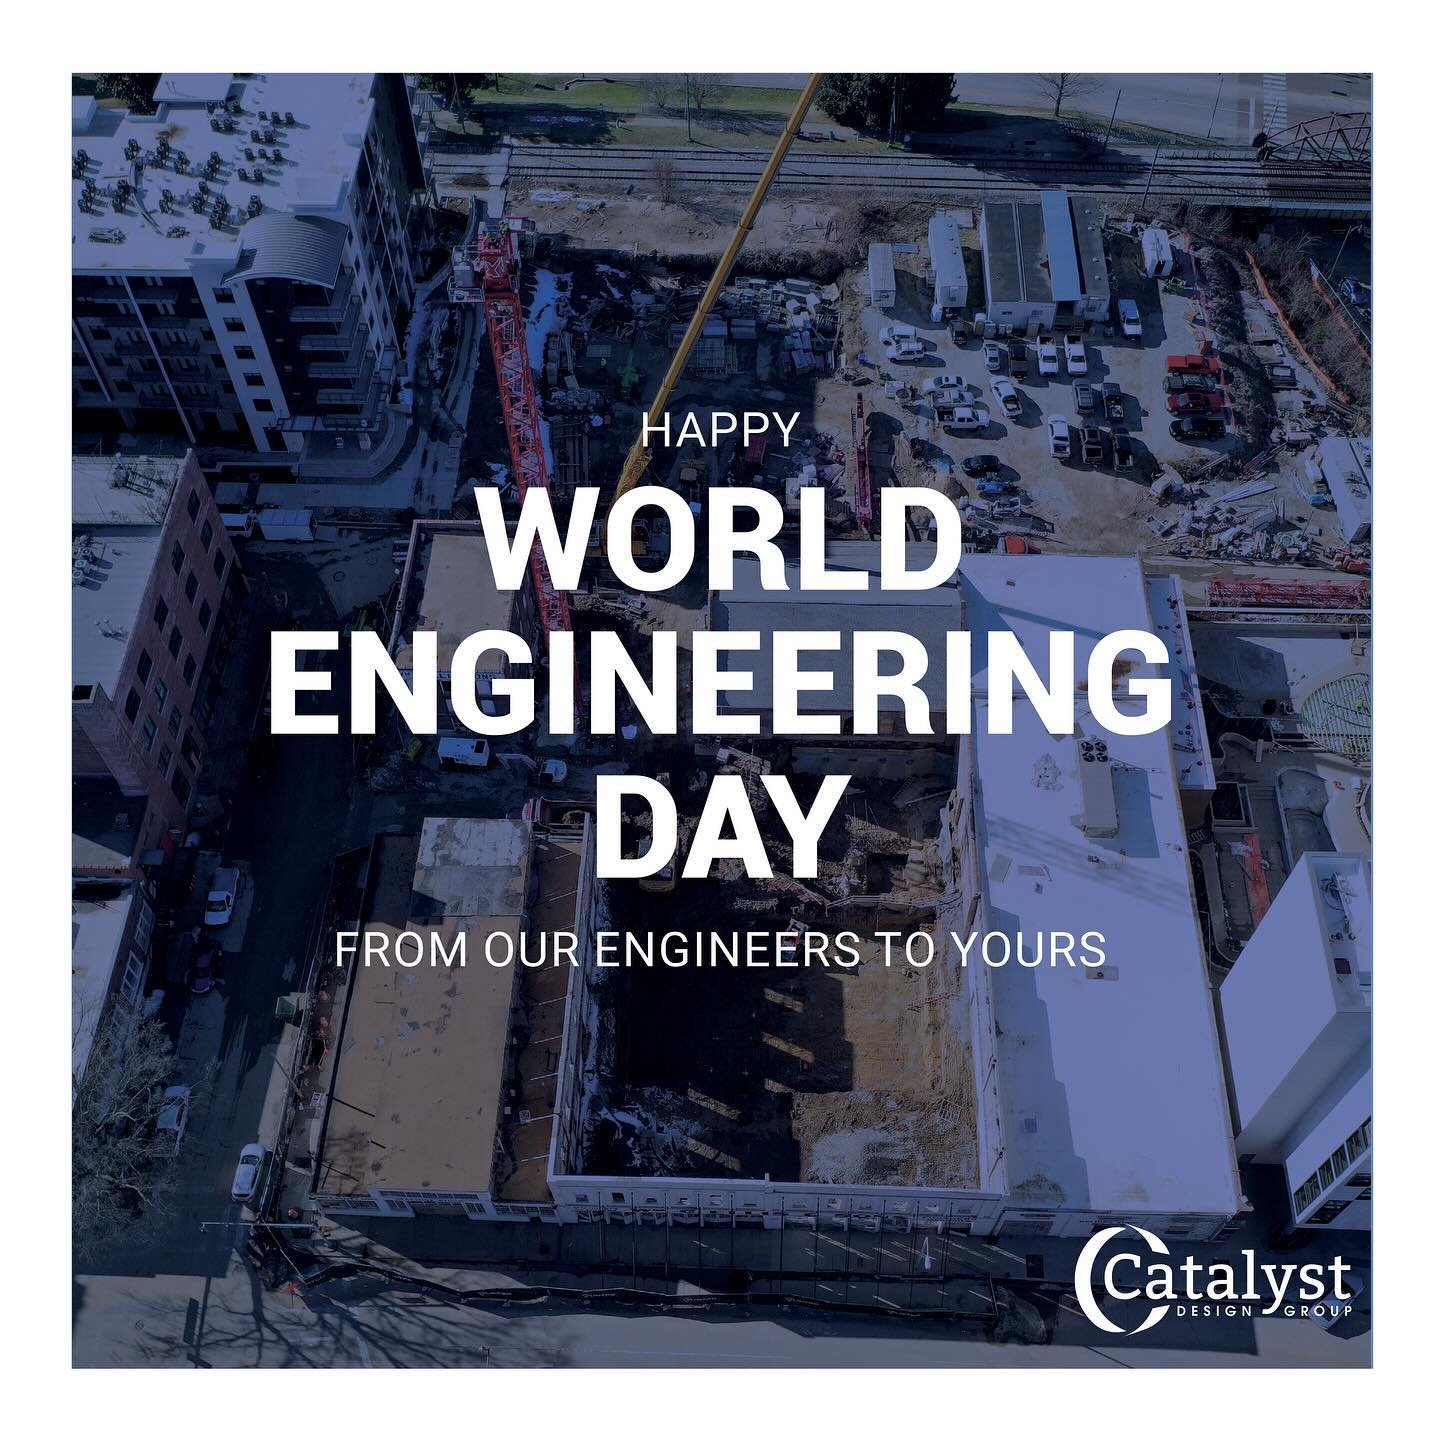 Happy World Engineering Day! Join us in congratulating Hannah &amp; John for recently passing their Professional Engineers license exams. We are so proud of you both and all your hard work! #worldengineeringday